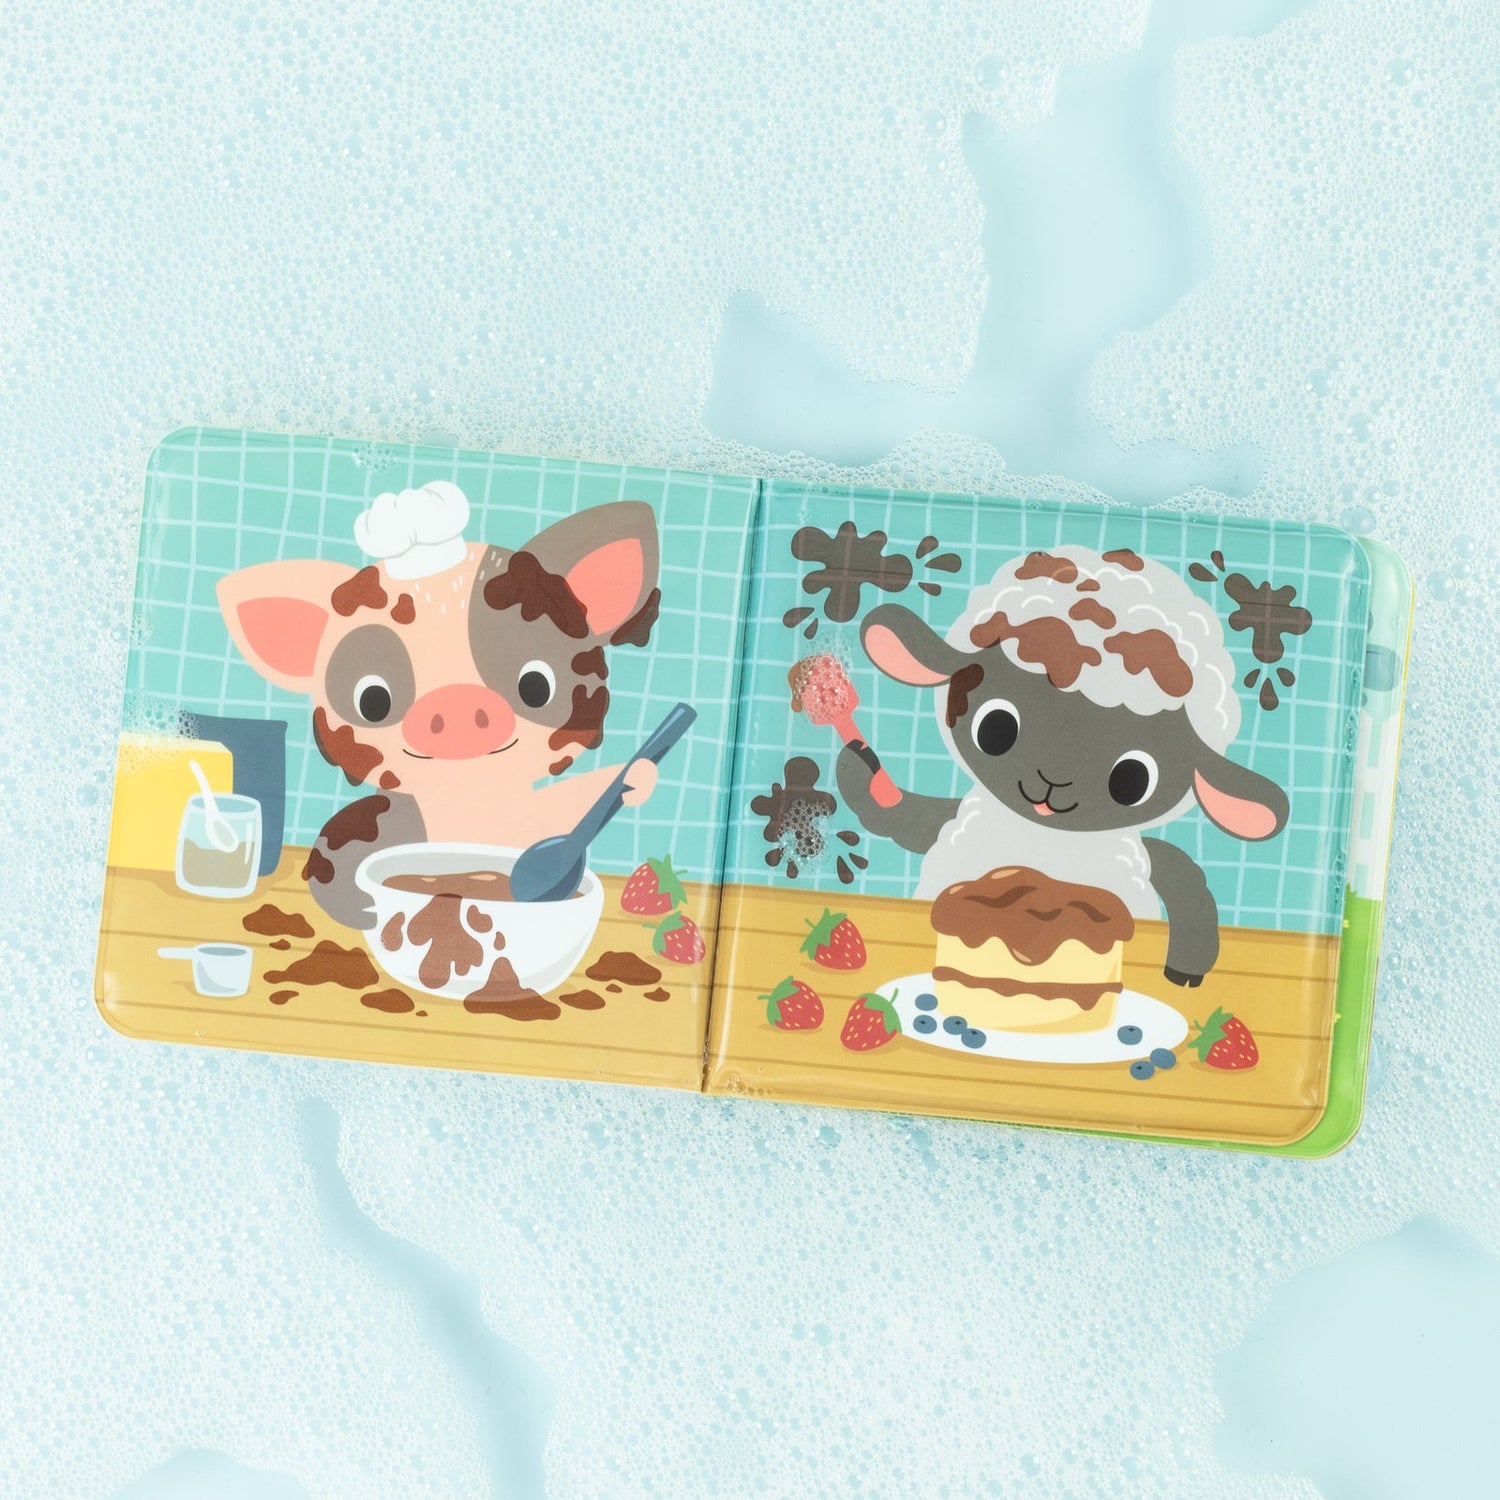 TIGER TRIBE | BATH BOOK - MESSY FARM by TIGER TRIBE - The Playful Collective